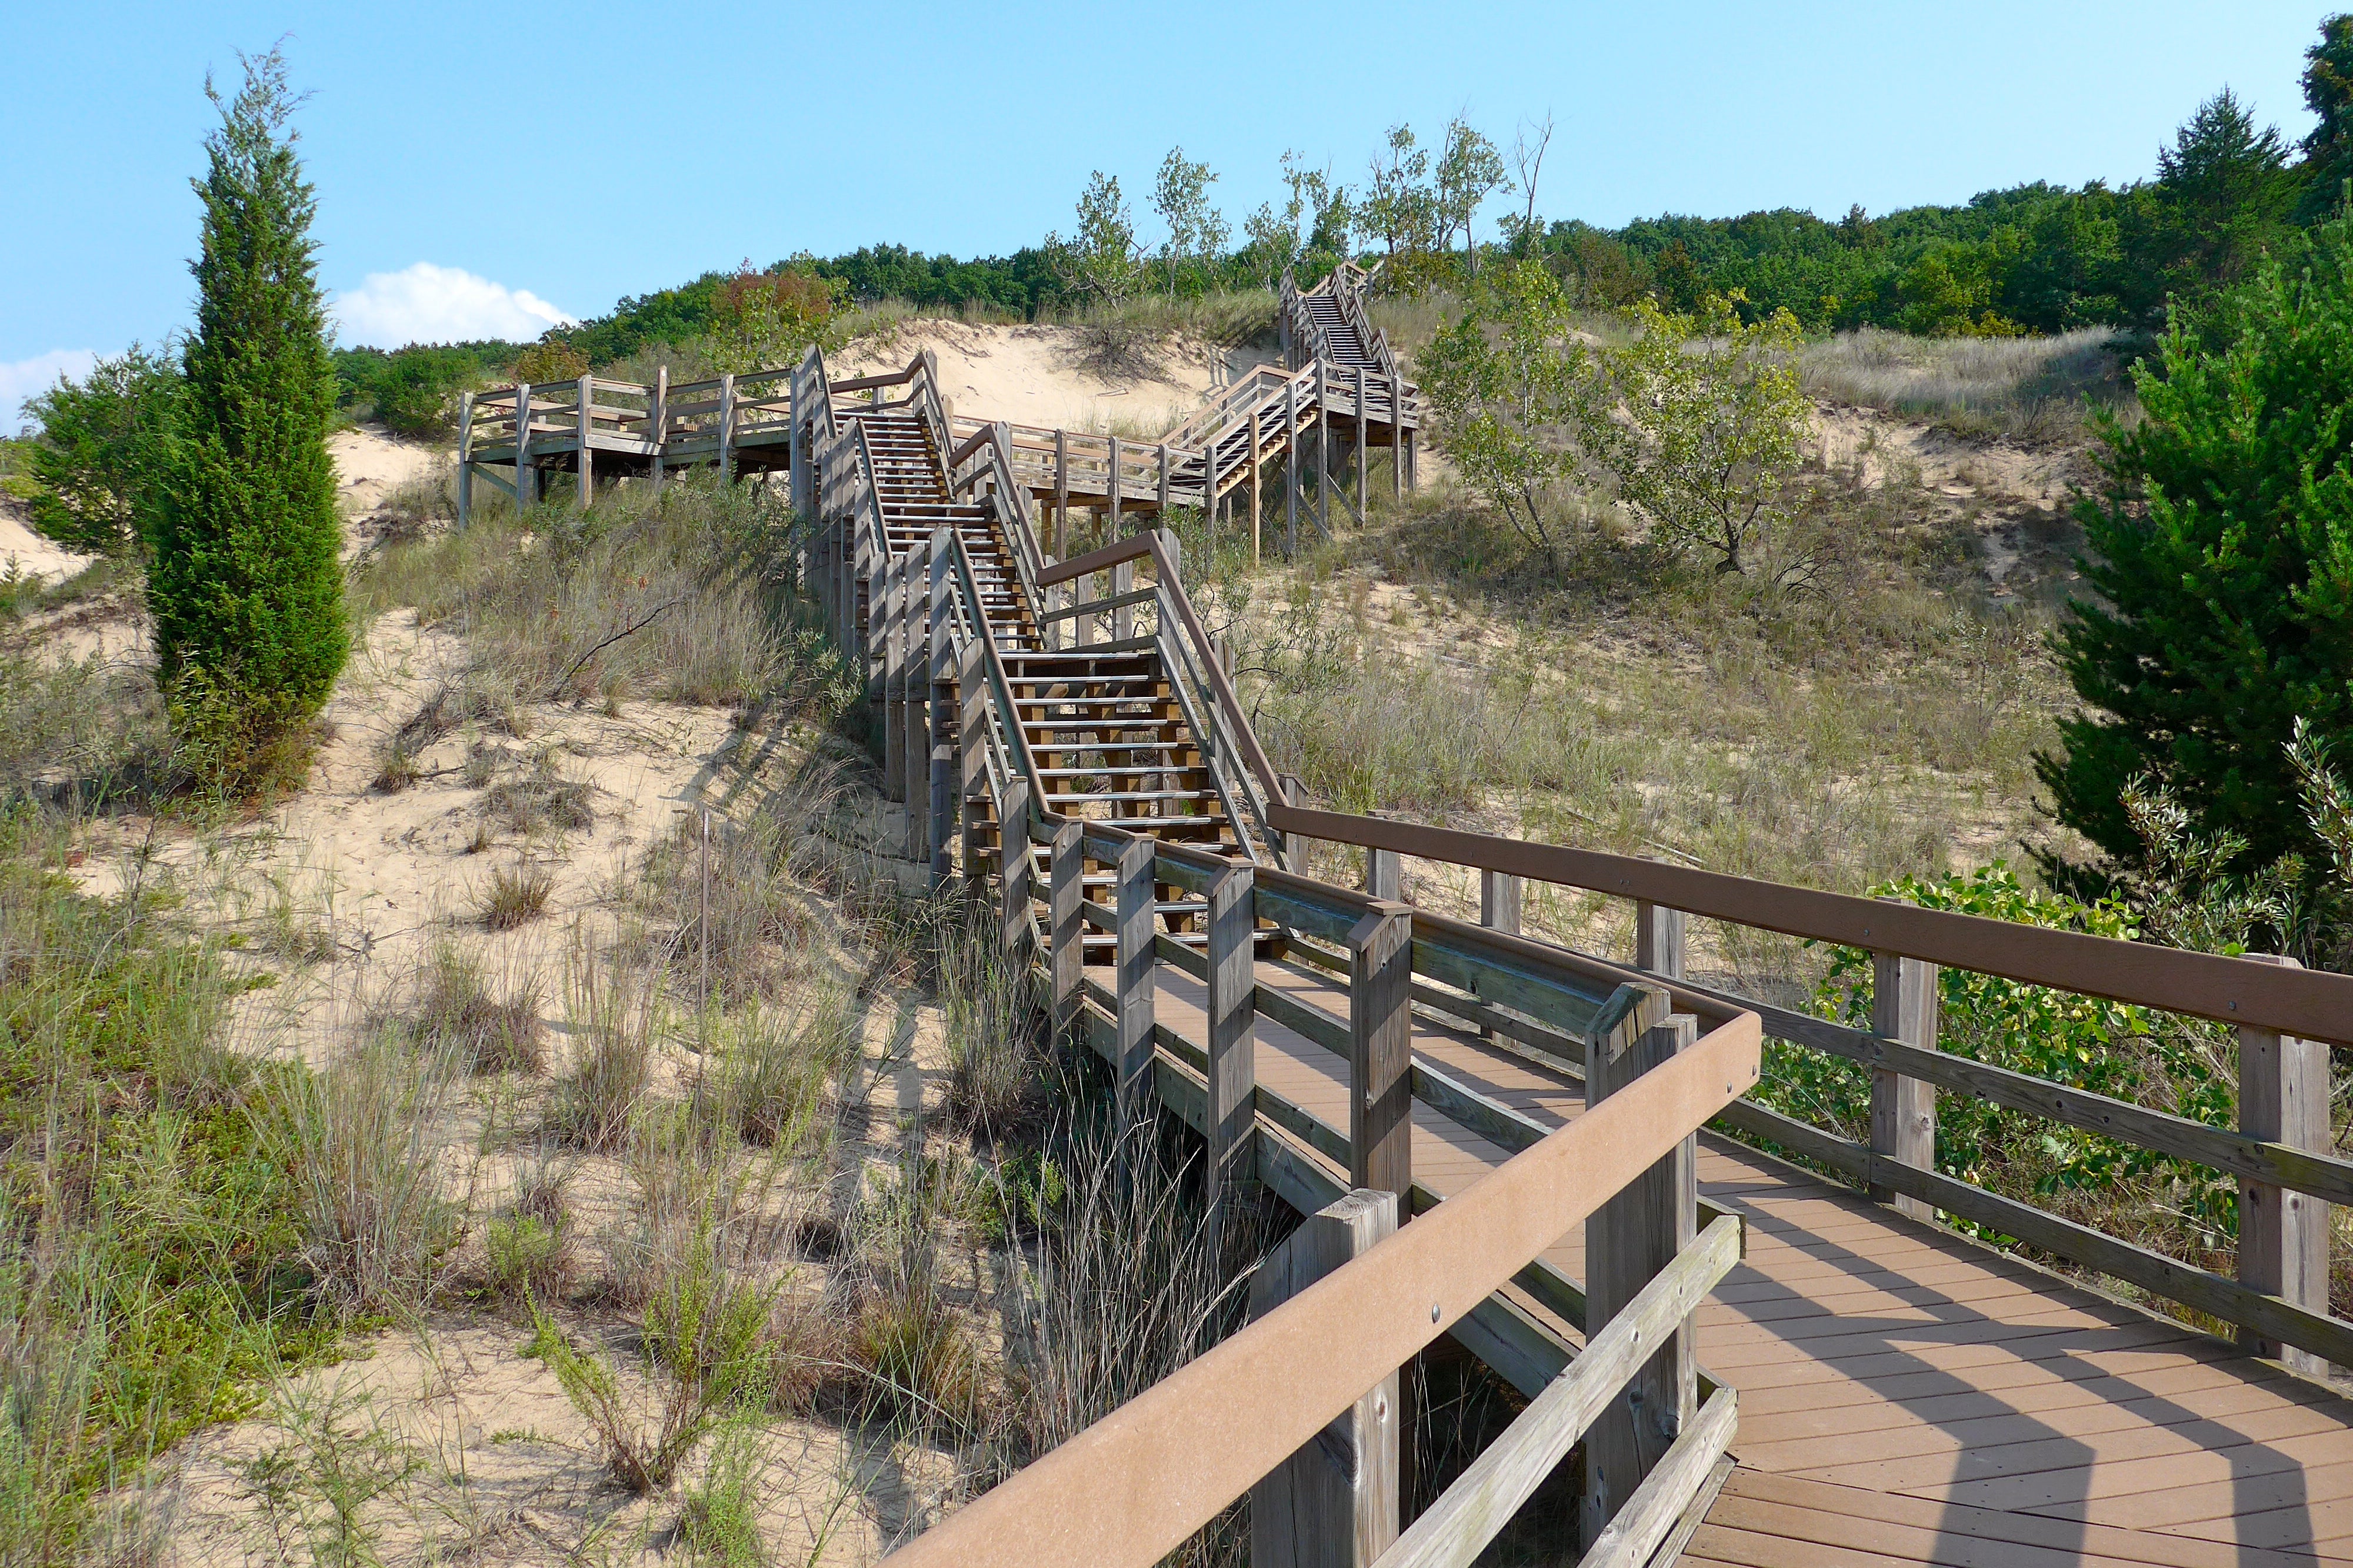 West Beach - Dune Succession trail - most is board walk/stairs to protect the dune habitat from people going 'off trail'